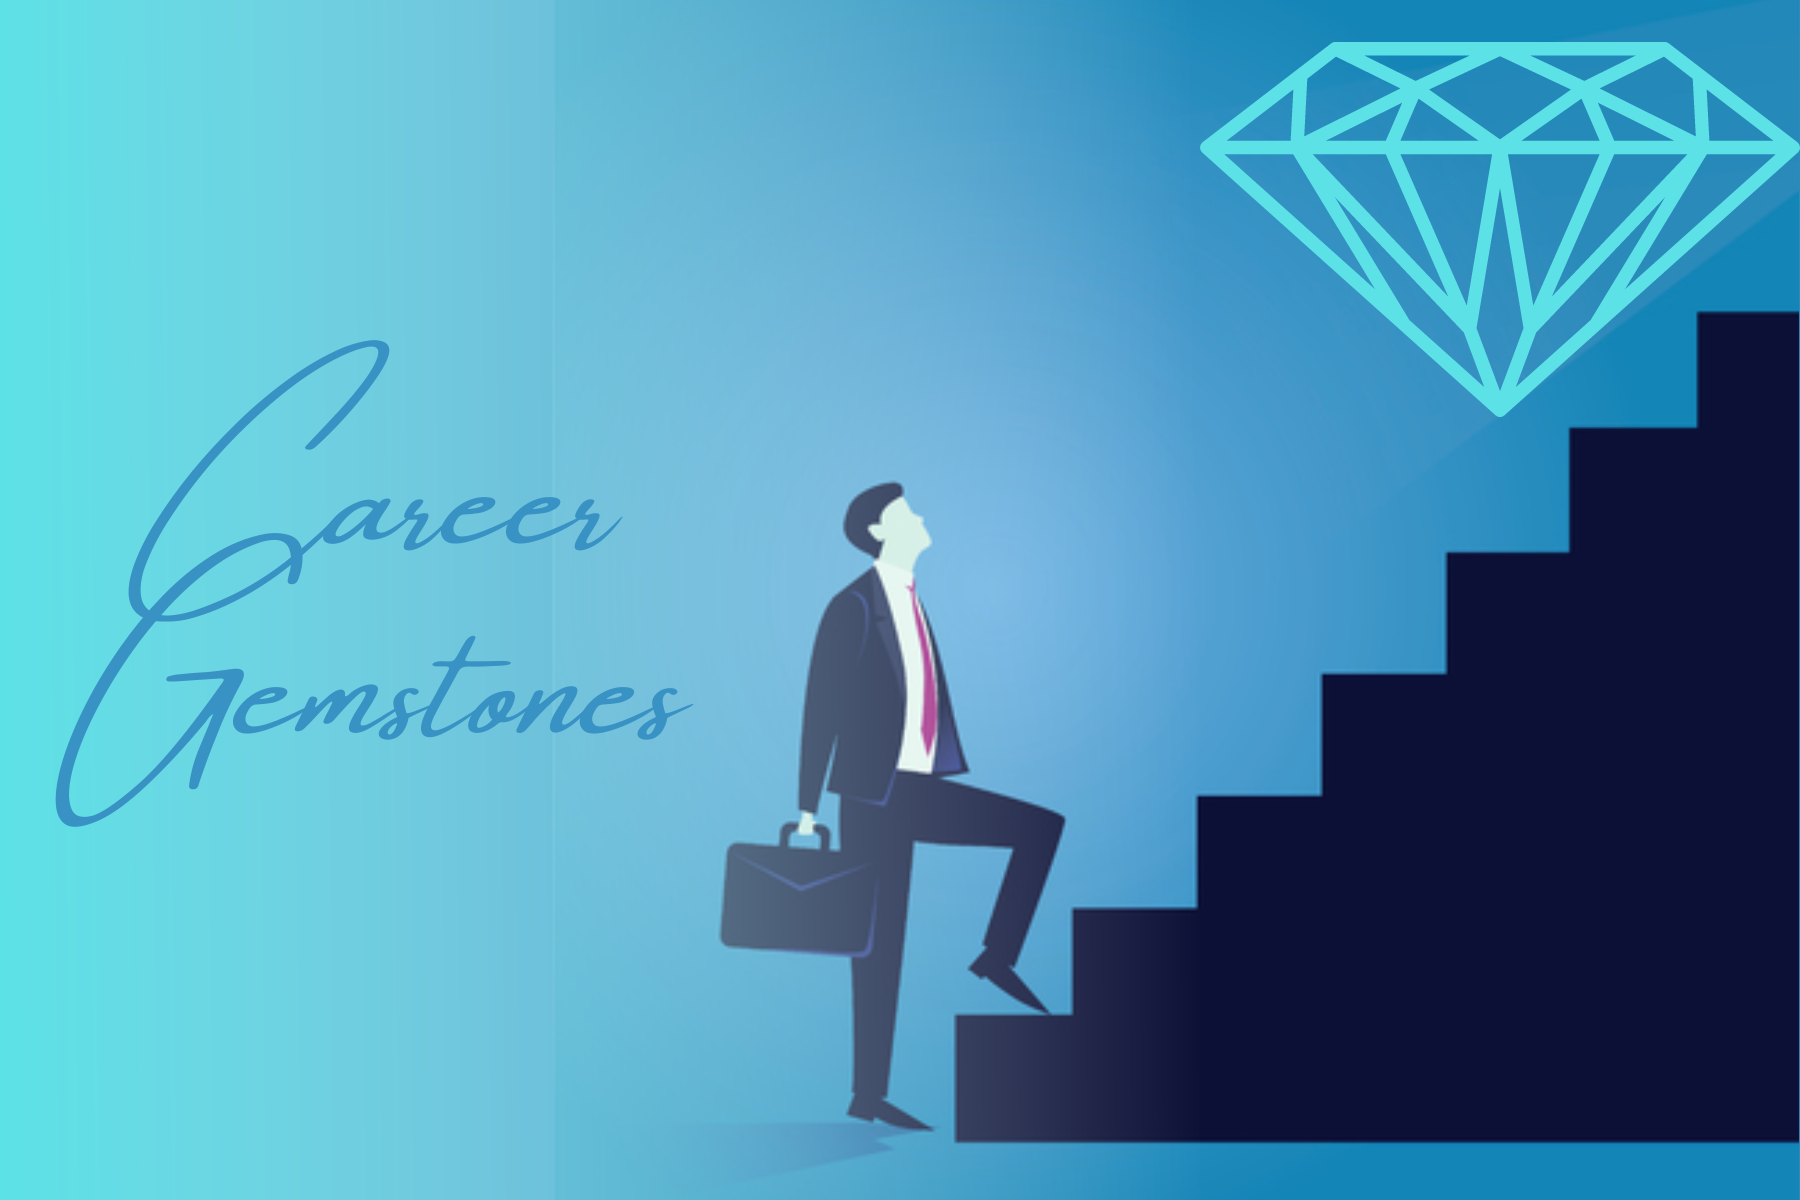 Career Gemstones - Experience The Claimed Advantages Of These Potent Stones